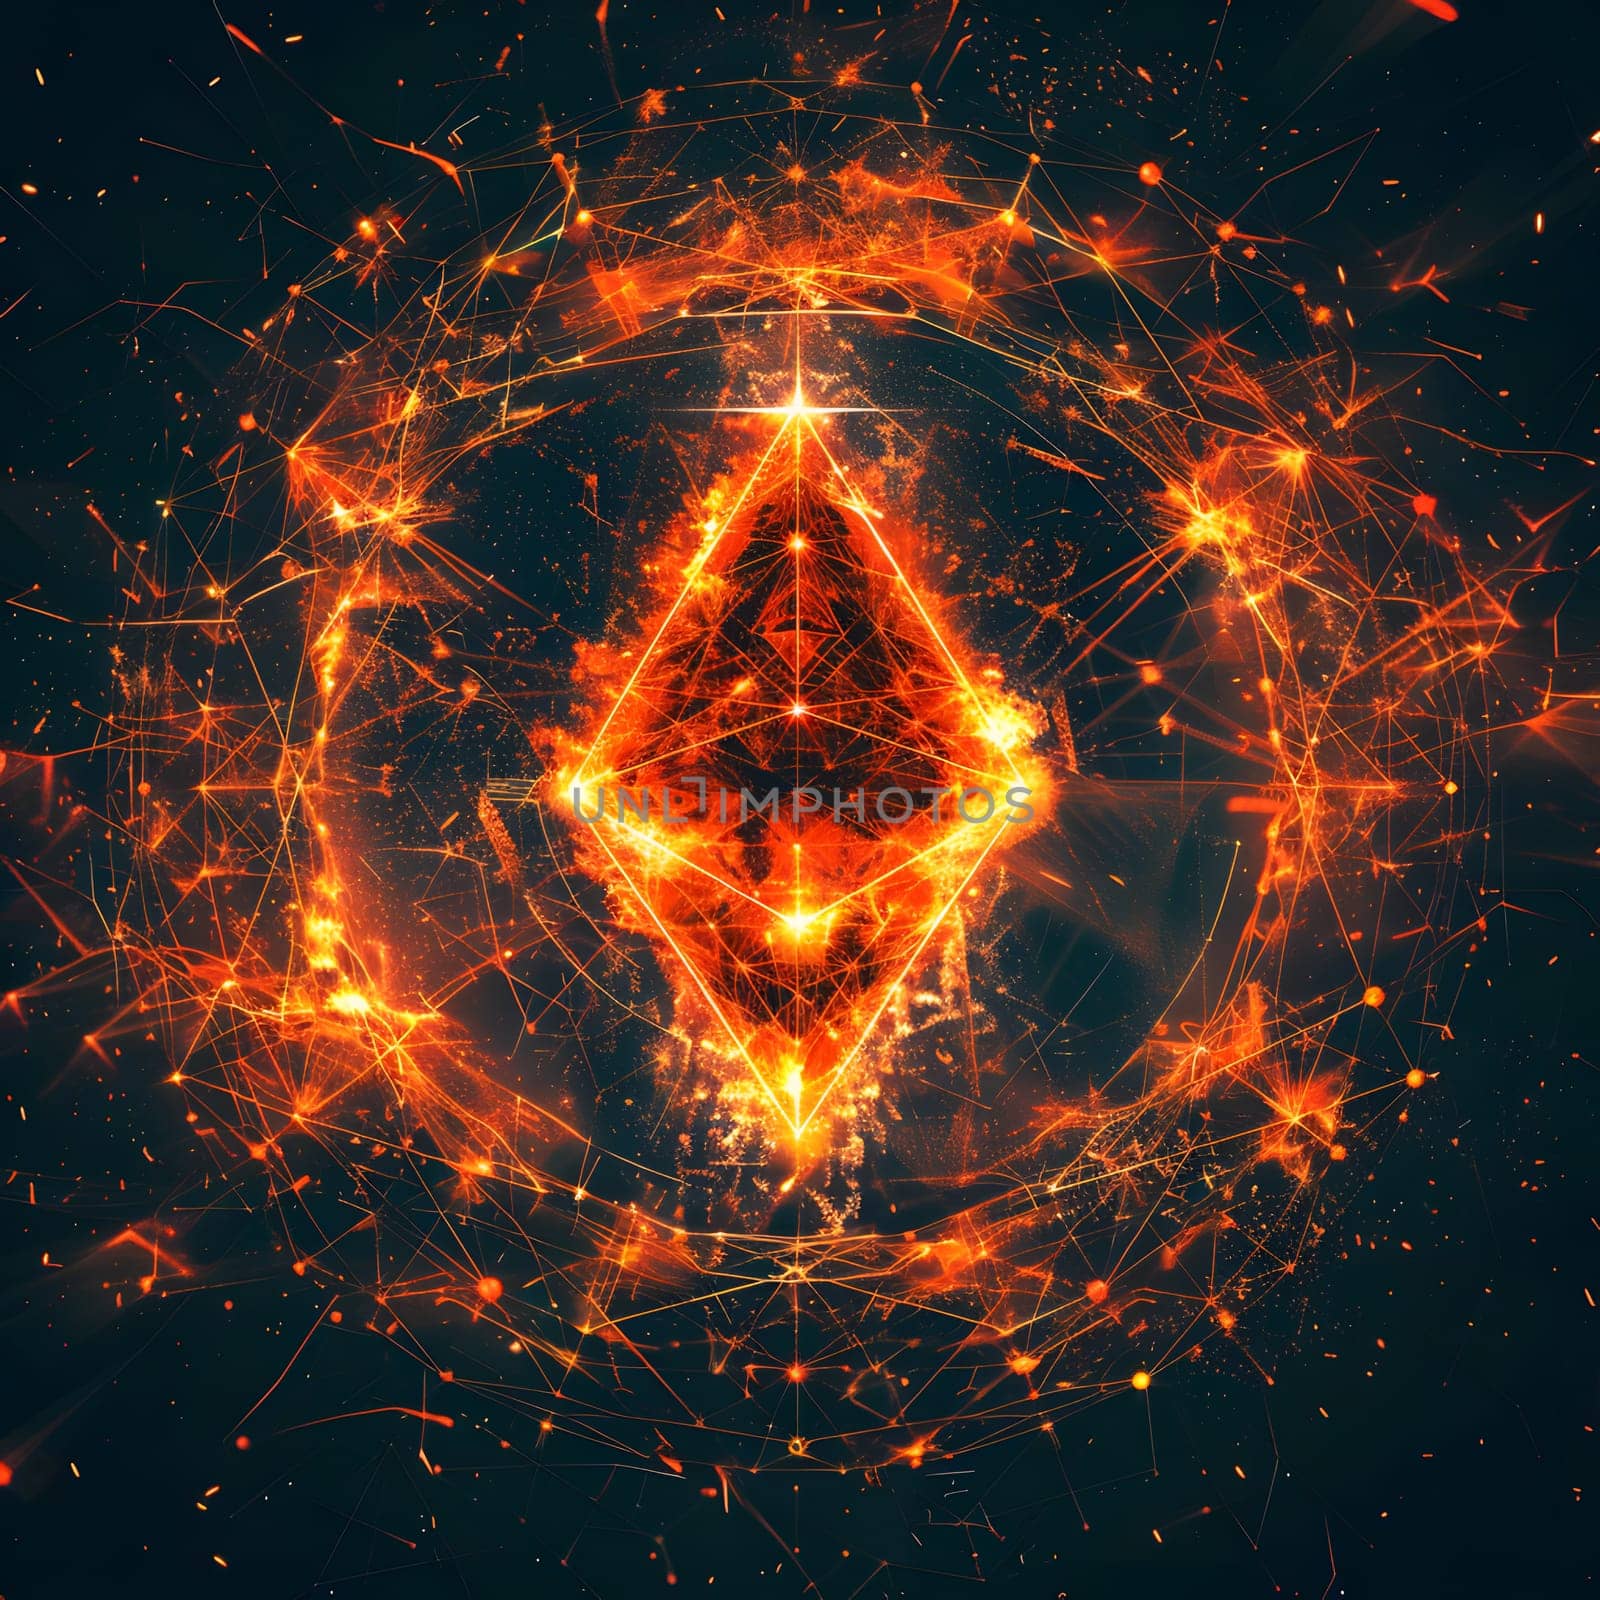 The Ethereum logo is encircled by a blazing ring of fiery orange flames resembling a celestial astronomical object in the sky, emitting heat and radiating an amber glow